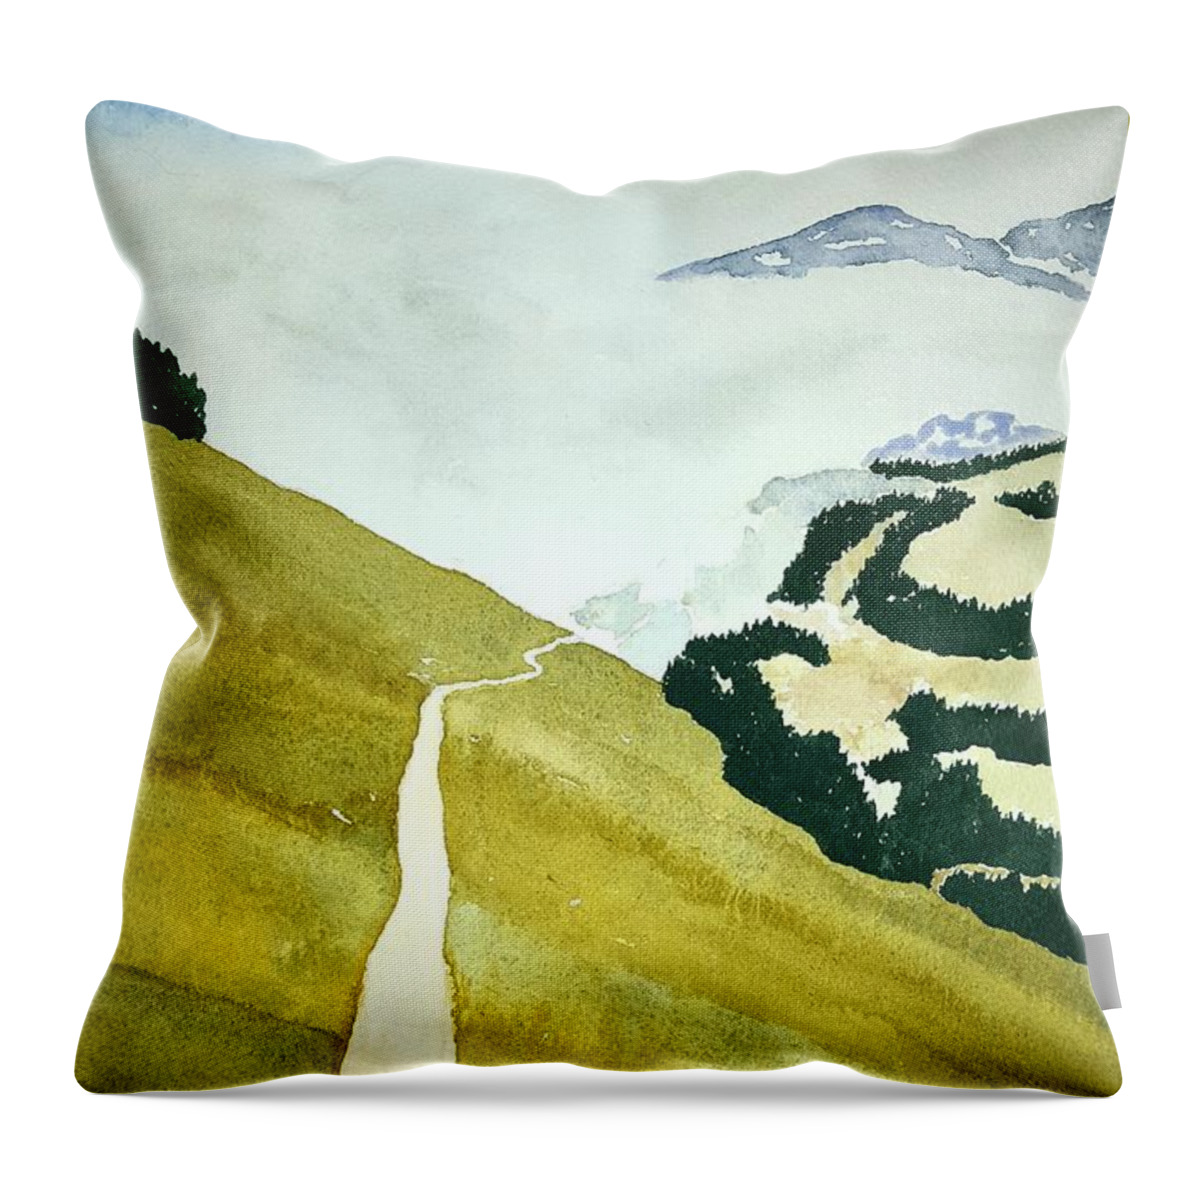 Watercolor Throw Pillow featuring the painting Path of Lore by John Klobucher